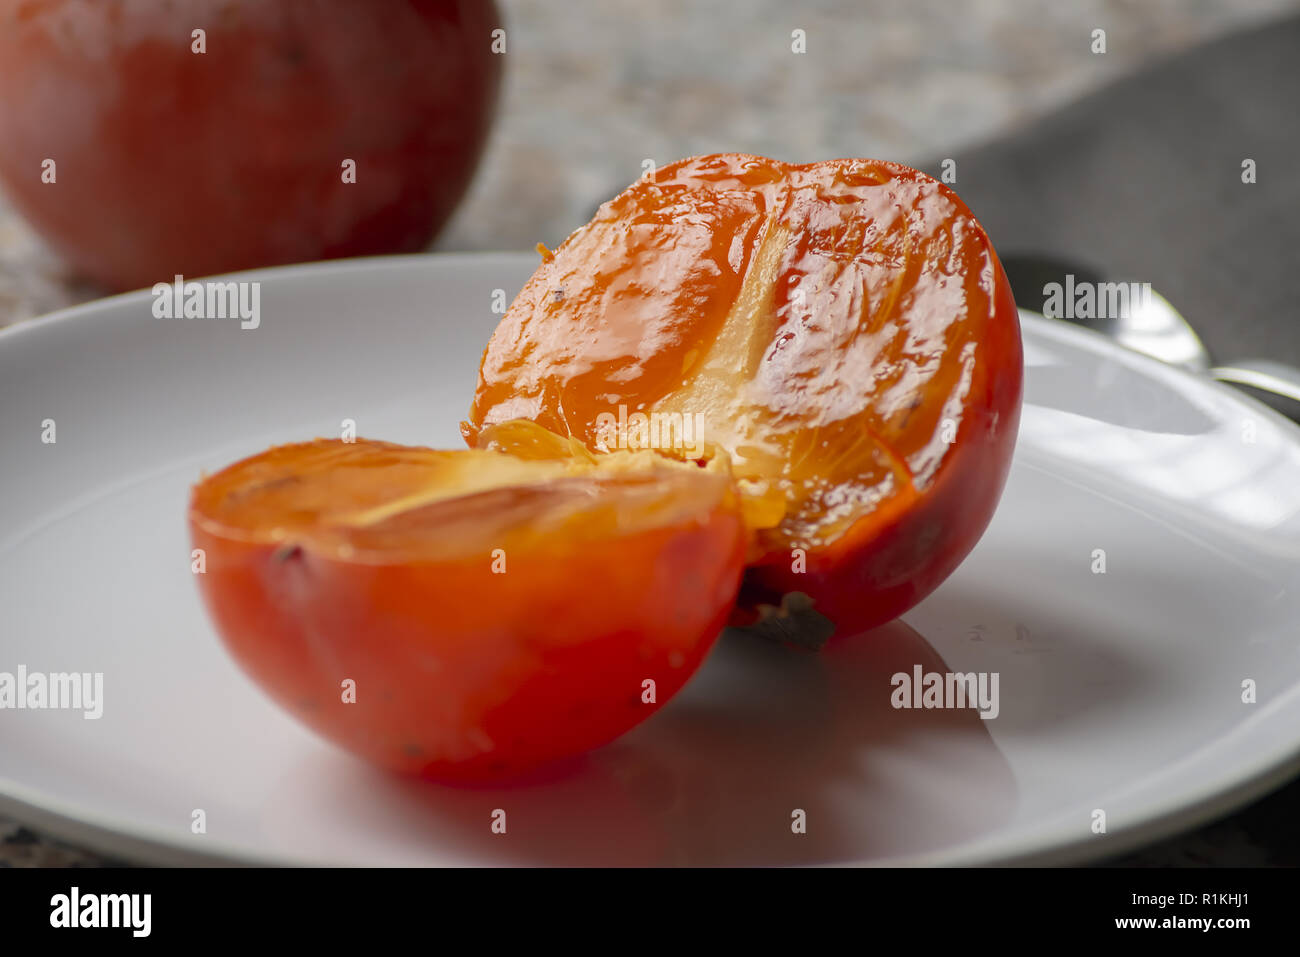 fruit of khaki in the plate cut in half close-up Stock Photo